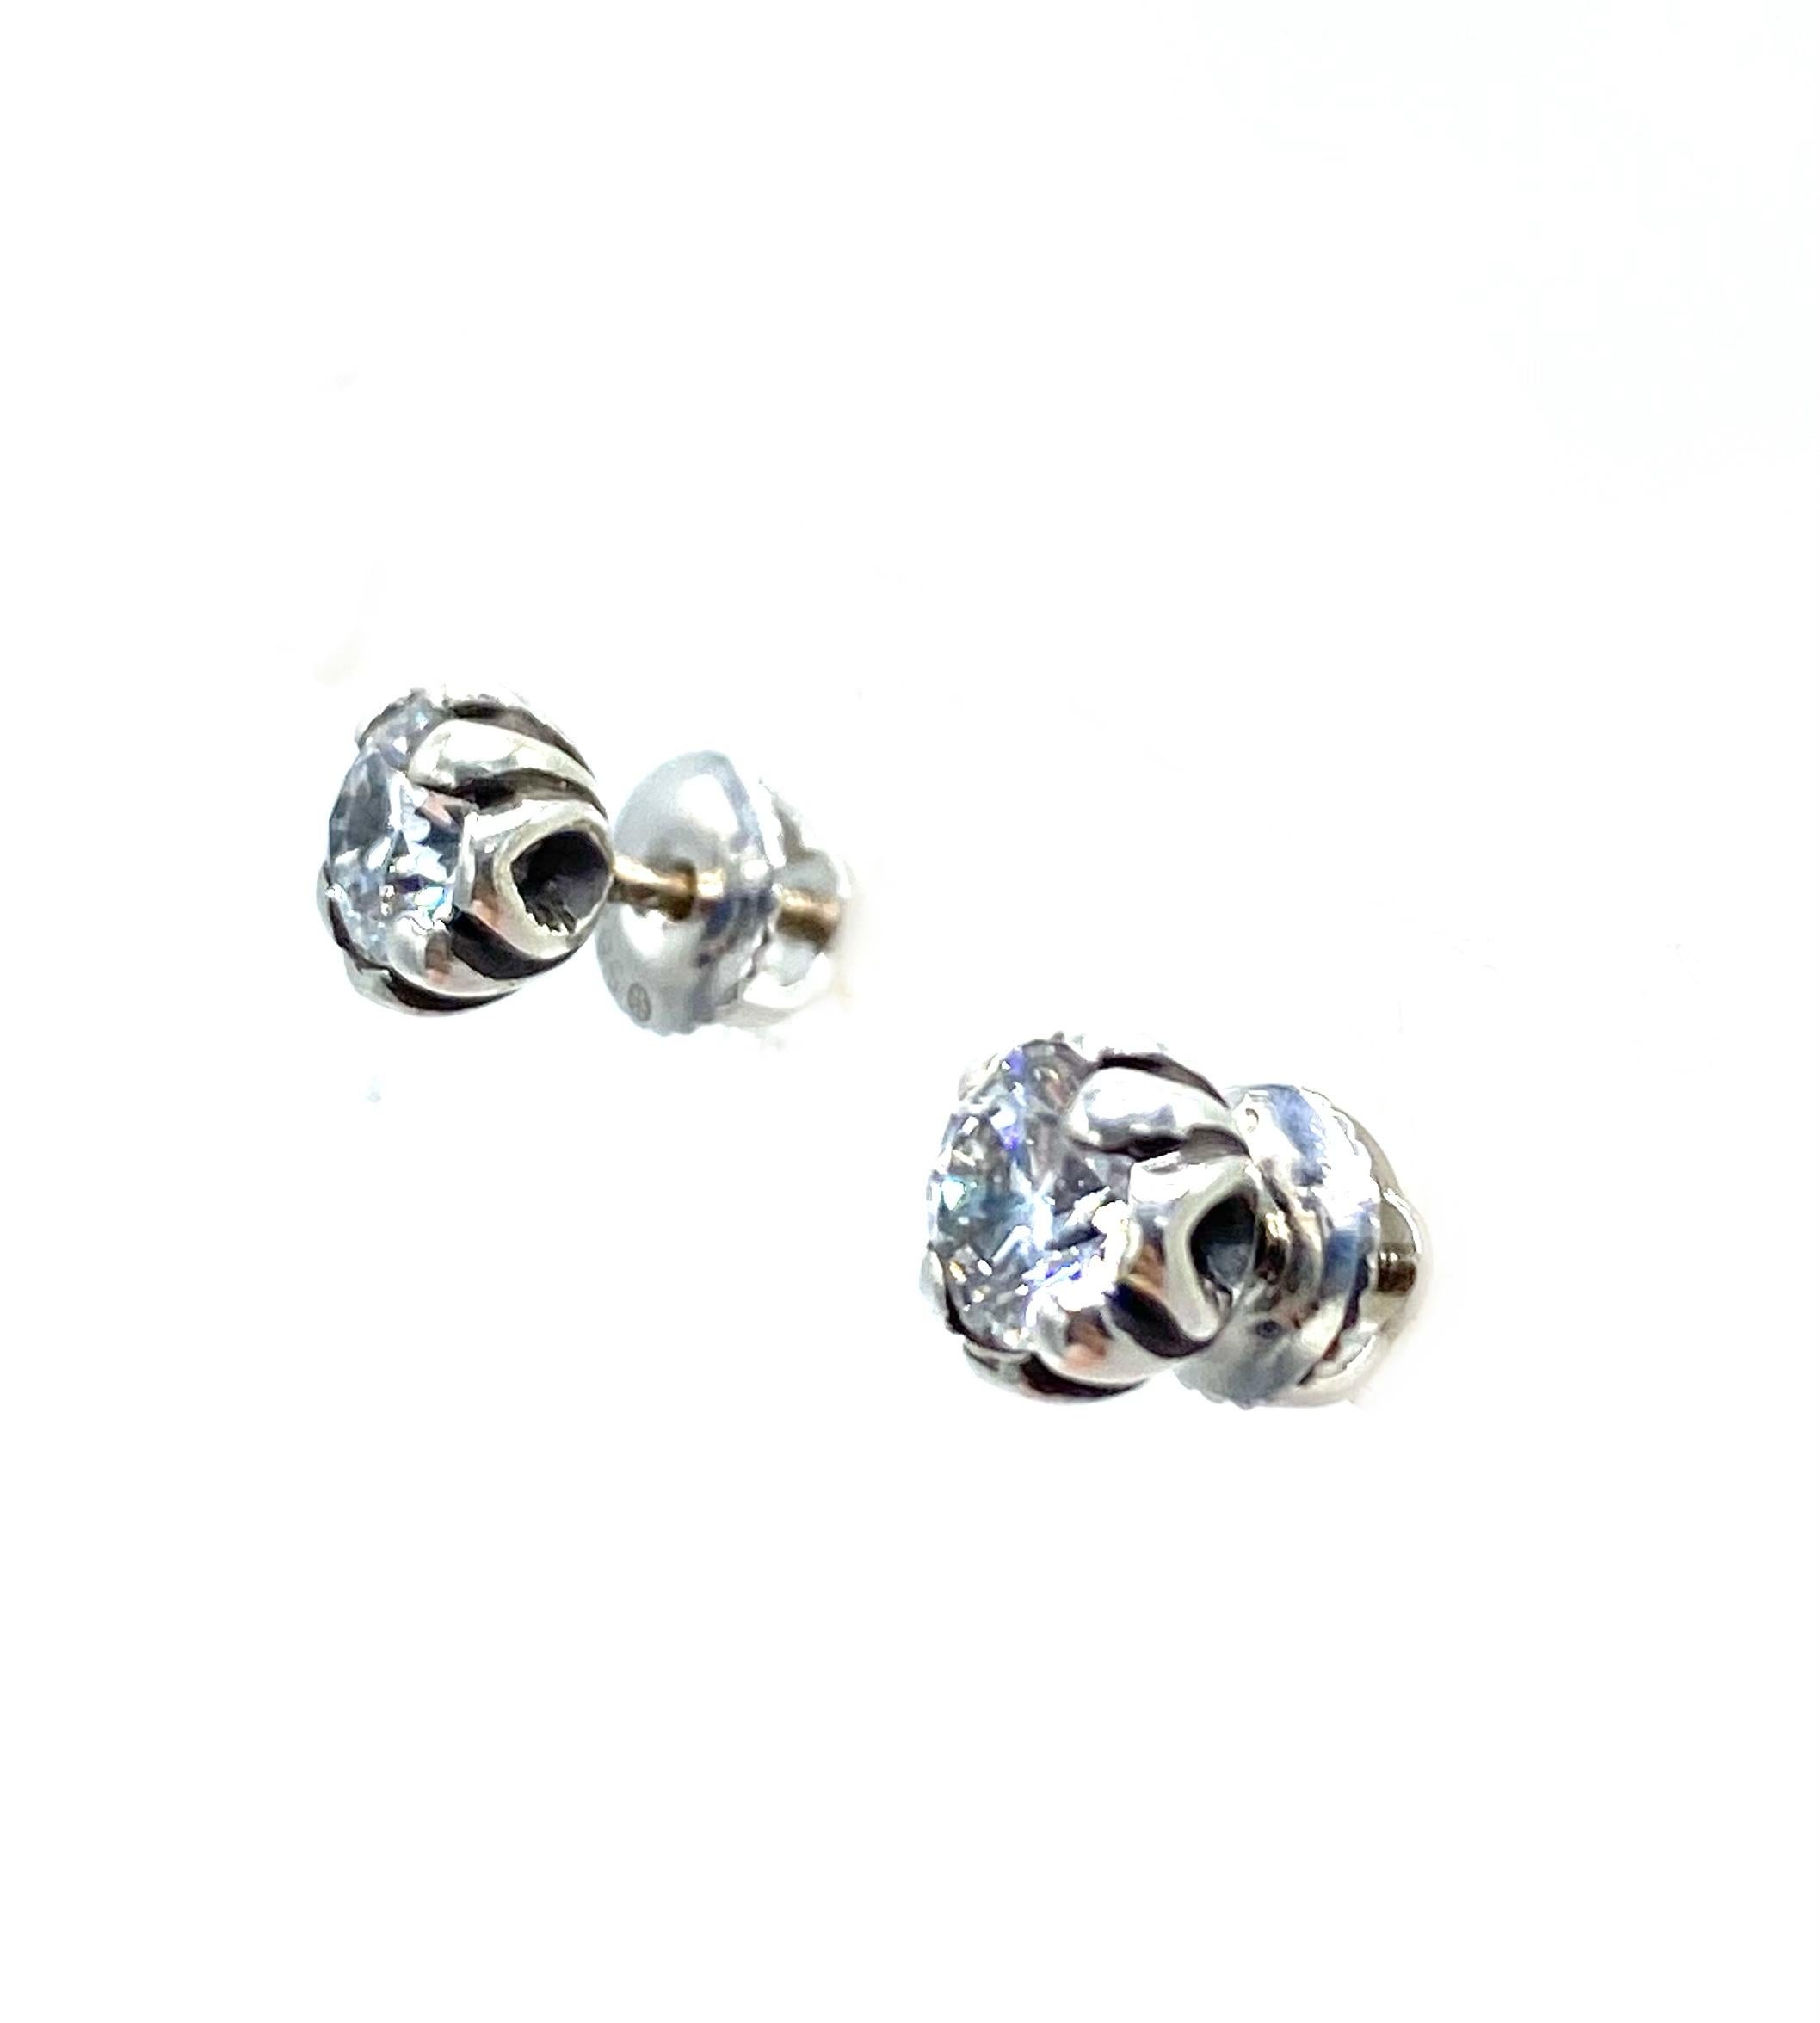 Product details:

The earrings are designed by Chrome Hearts. They feature 1.0 cts of round brilliant cut diamonds, G-H color, 14 karat white gold and screw in closure.
Total weight is 1.8 grams.
